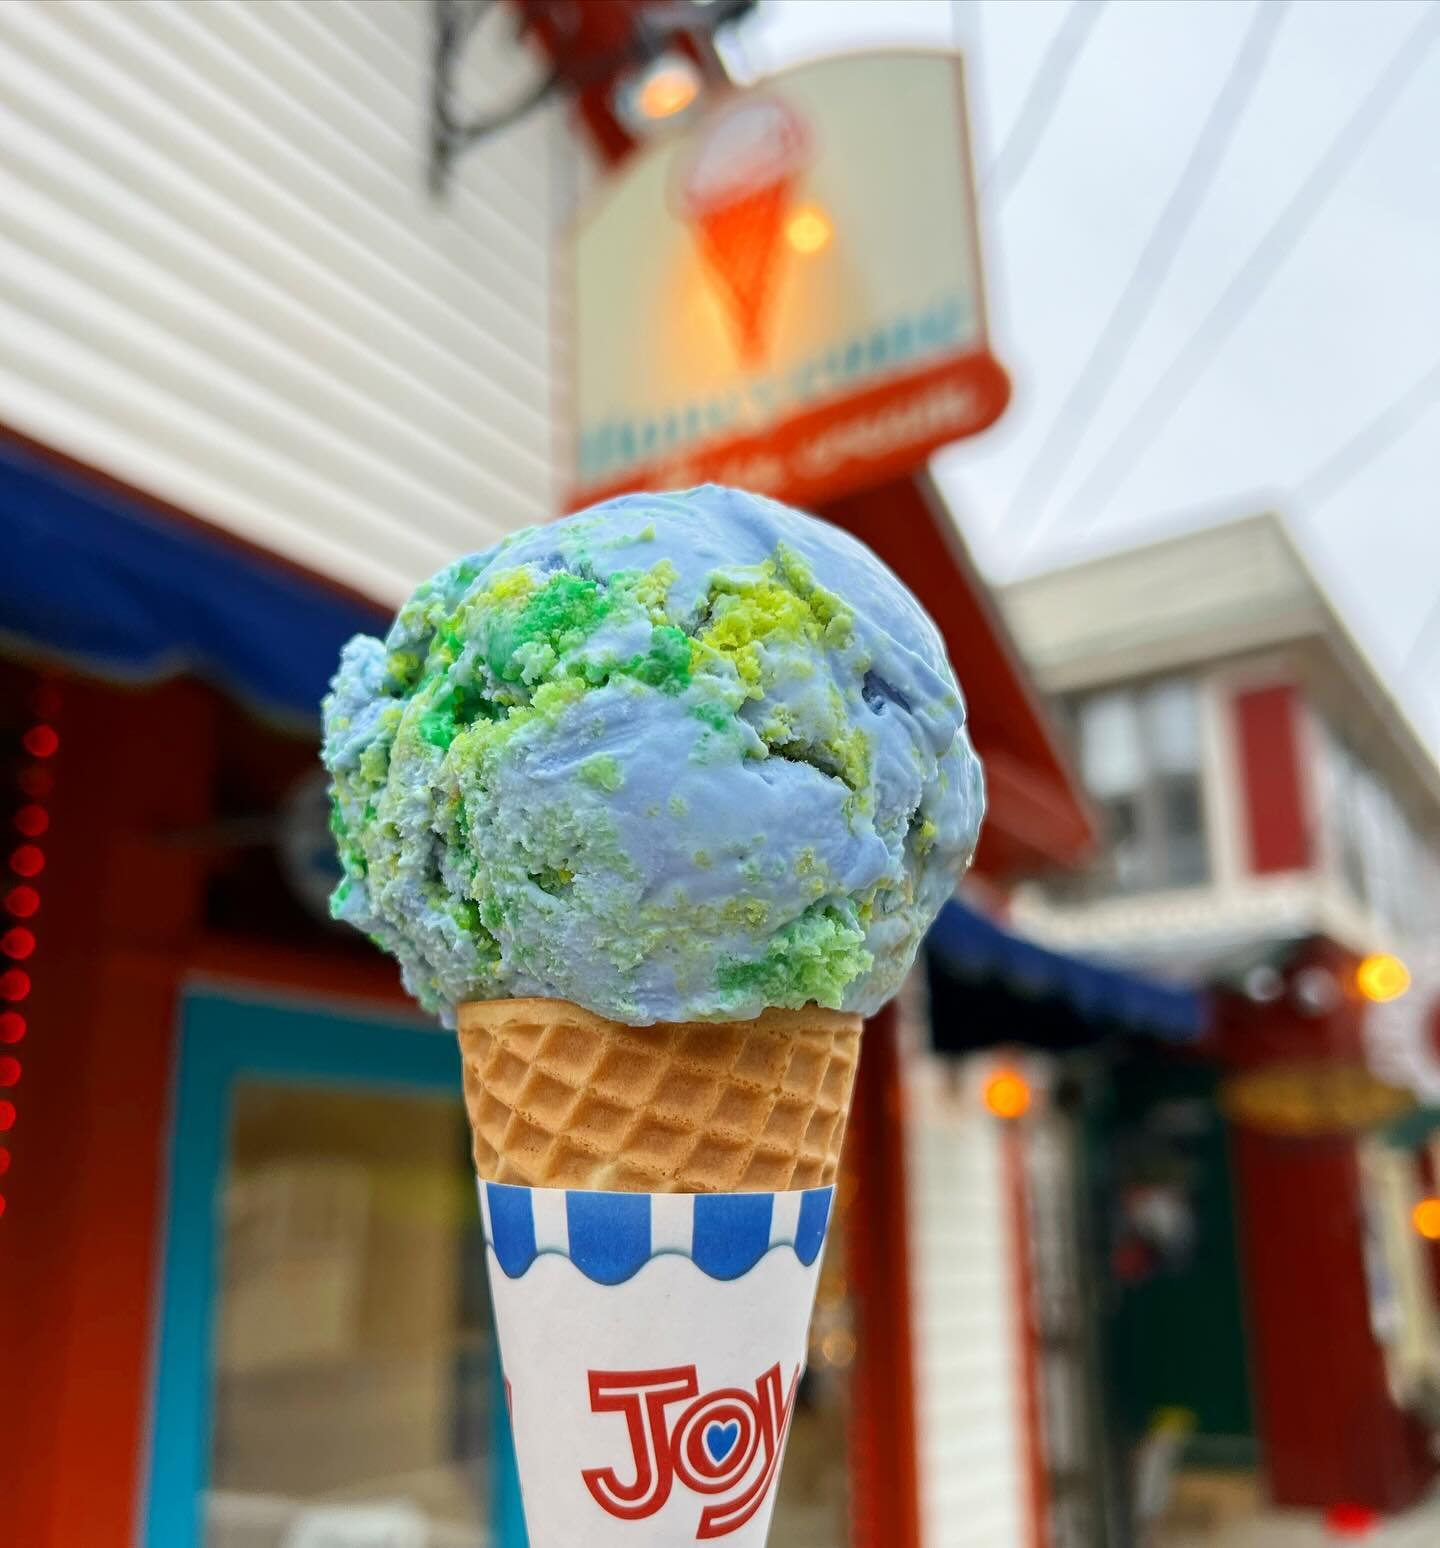 Okay, one last special addition to the menu for tomorrow&rsquo;s Chester Earth Day (Saturday 4/20)&hellip;🥁🥁🥁&hellip;

🌍MOTHER EARTH ICE CREAM🌍

Blue vanilla ice cream (colored with spirulina!) with green cake🎂

We keep forgetting what we decid